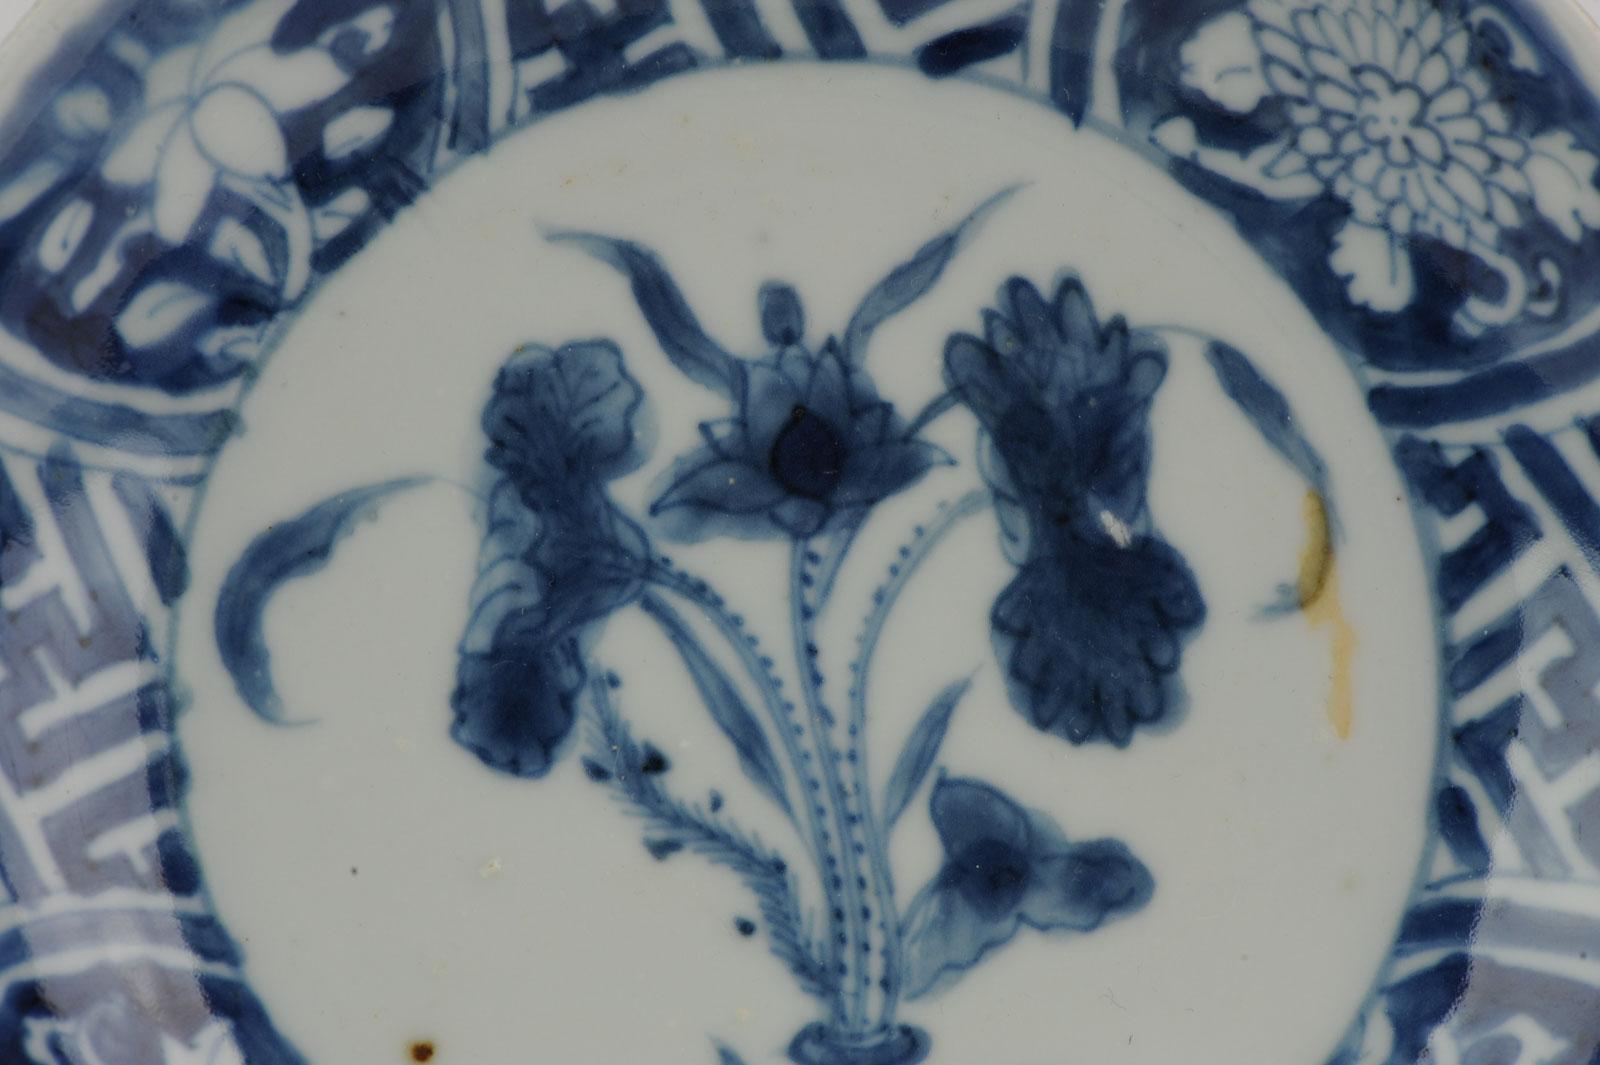 A very nicely decorated dish with a scene of flowers and geometric designs in the border.

Jingdezhen porcelain.

Additional information:
Material: Porcelain & Pottery
Color: Blue & White
Emperor: Plates
Style: Tianqi (1620-1627), Wanli